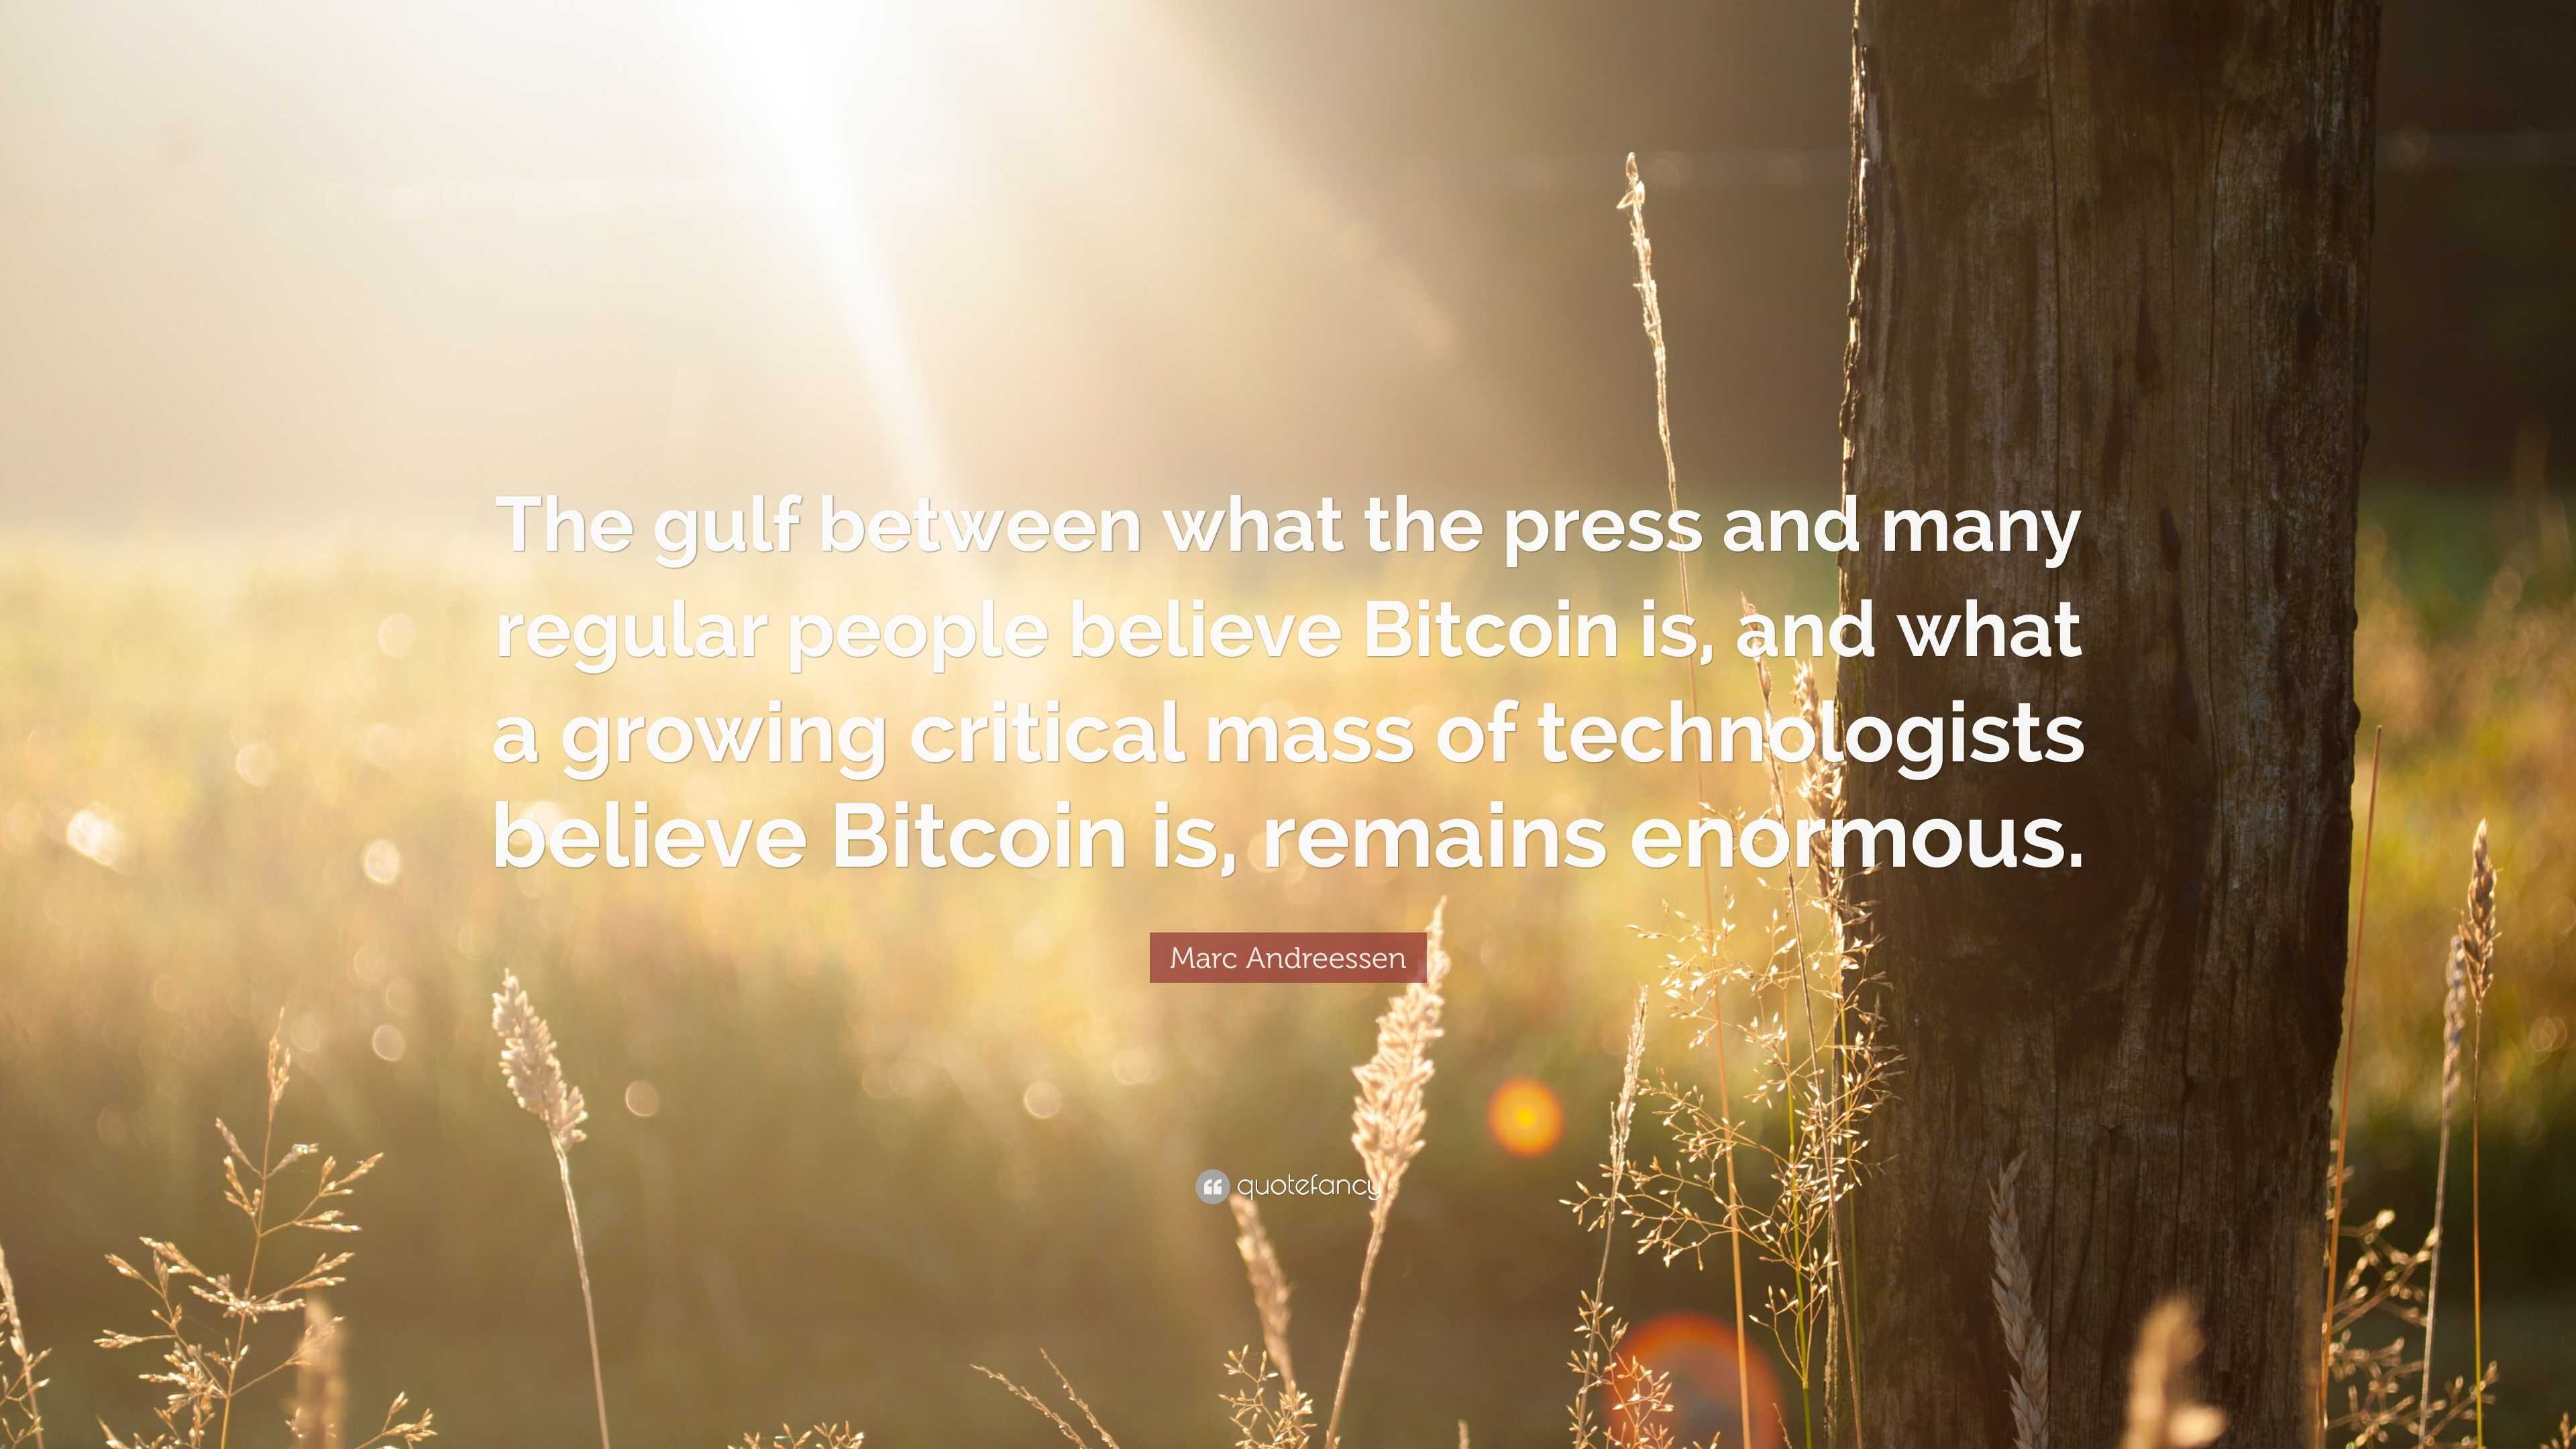 marc andreessen and bitcoins